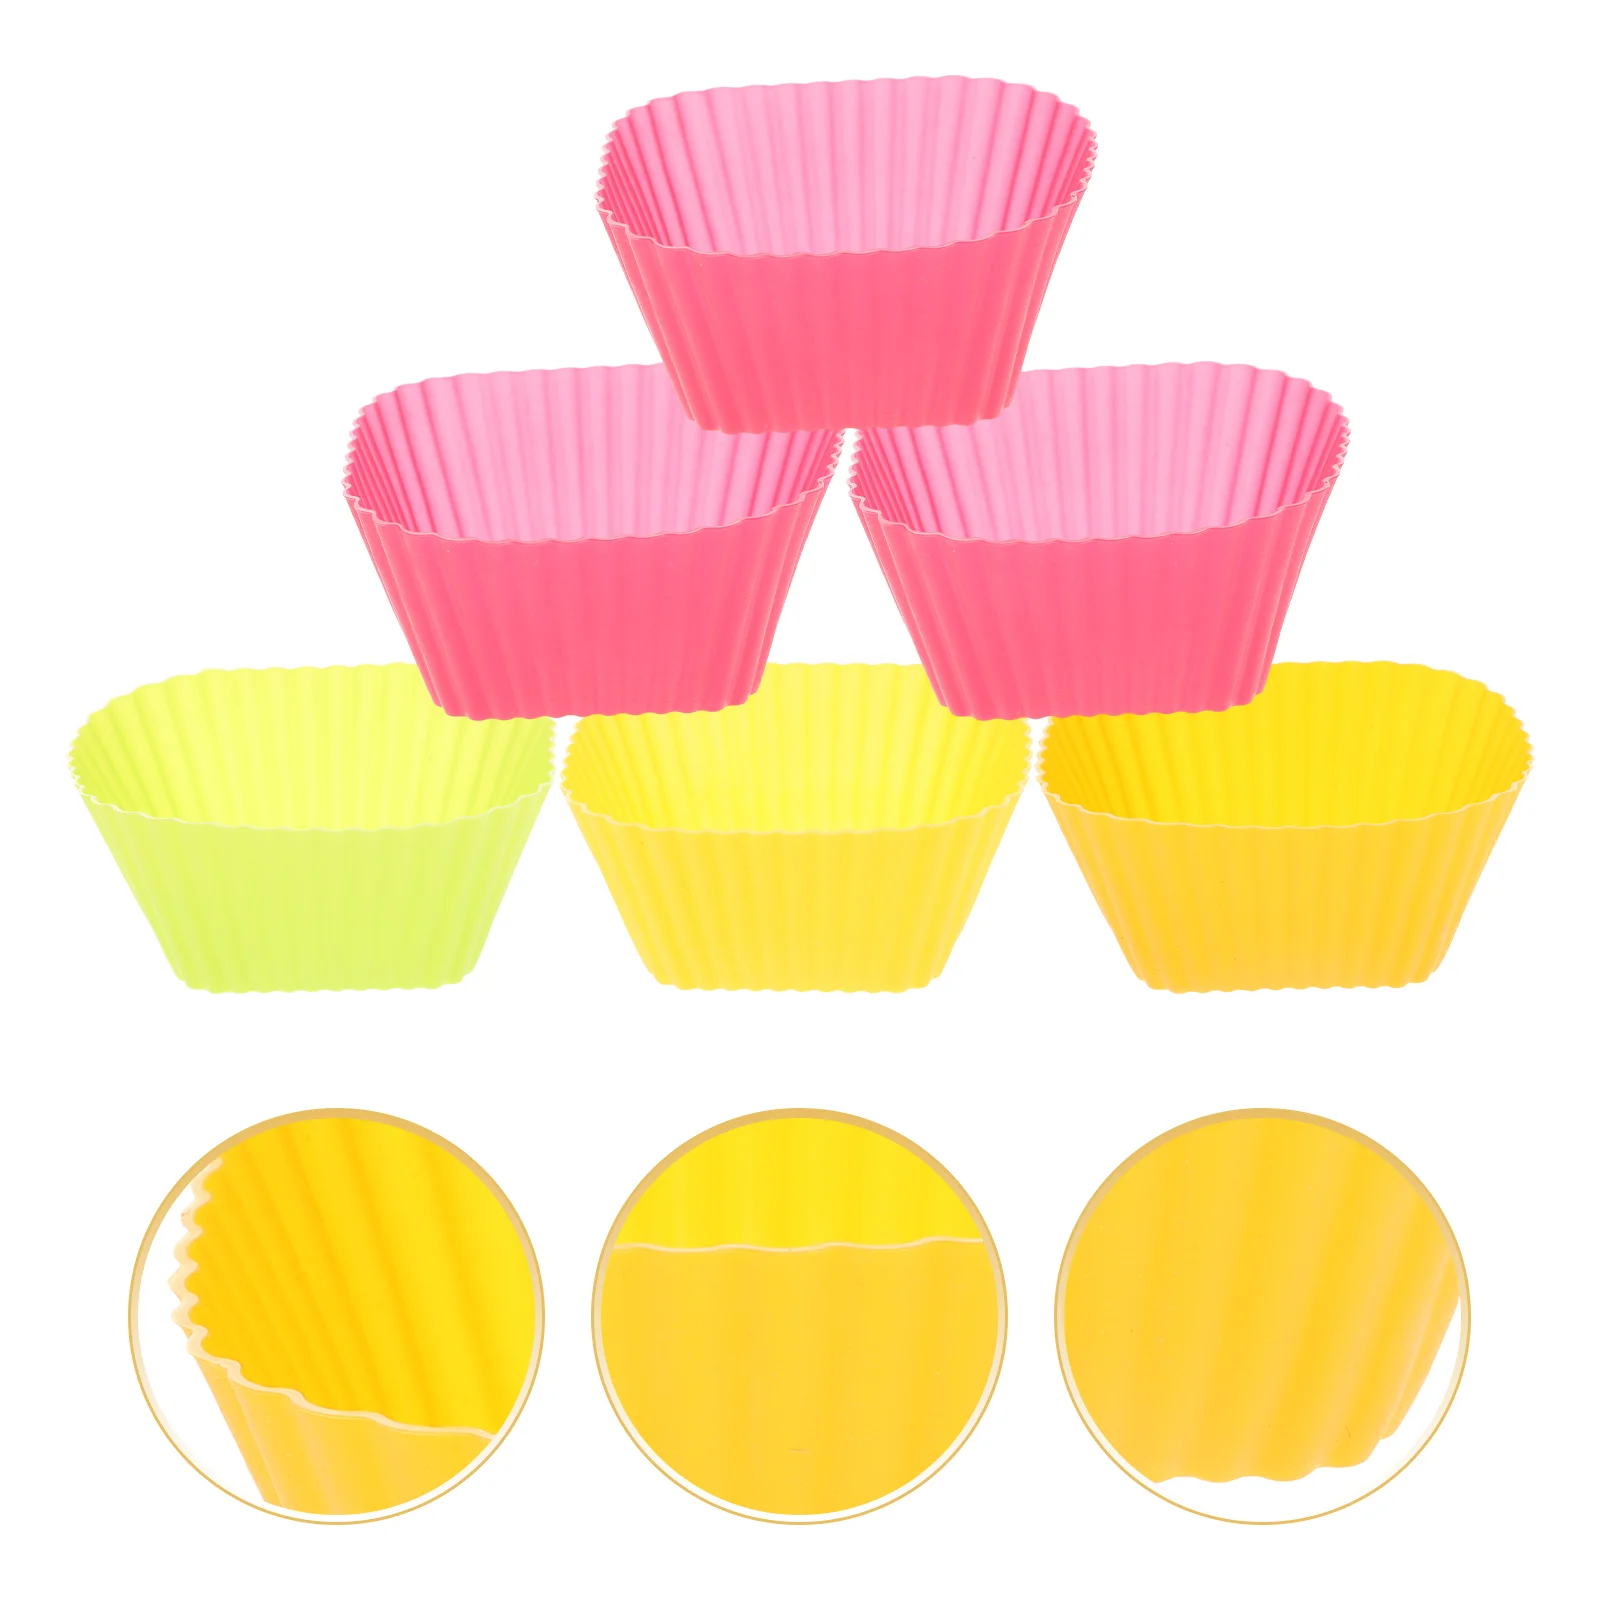 

Cups Baking Silicone Muffin Cupcake Liners Reusable Square Molds Rubber Cup Wrapper Pans Non Kitchen Stick Mold Cake Nonstick